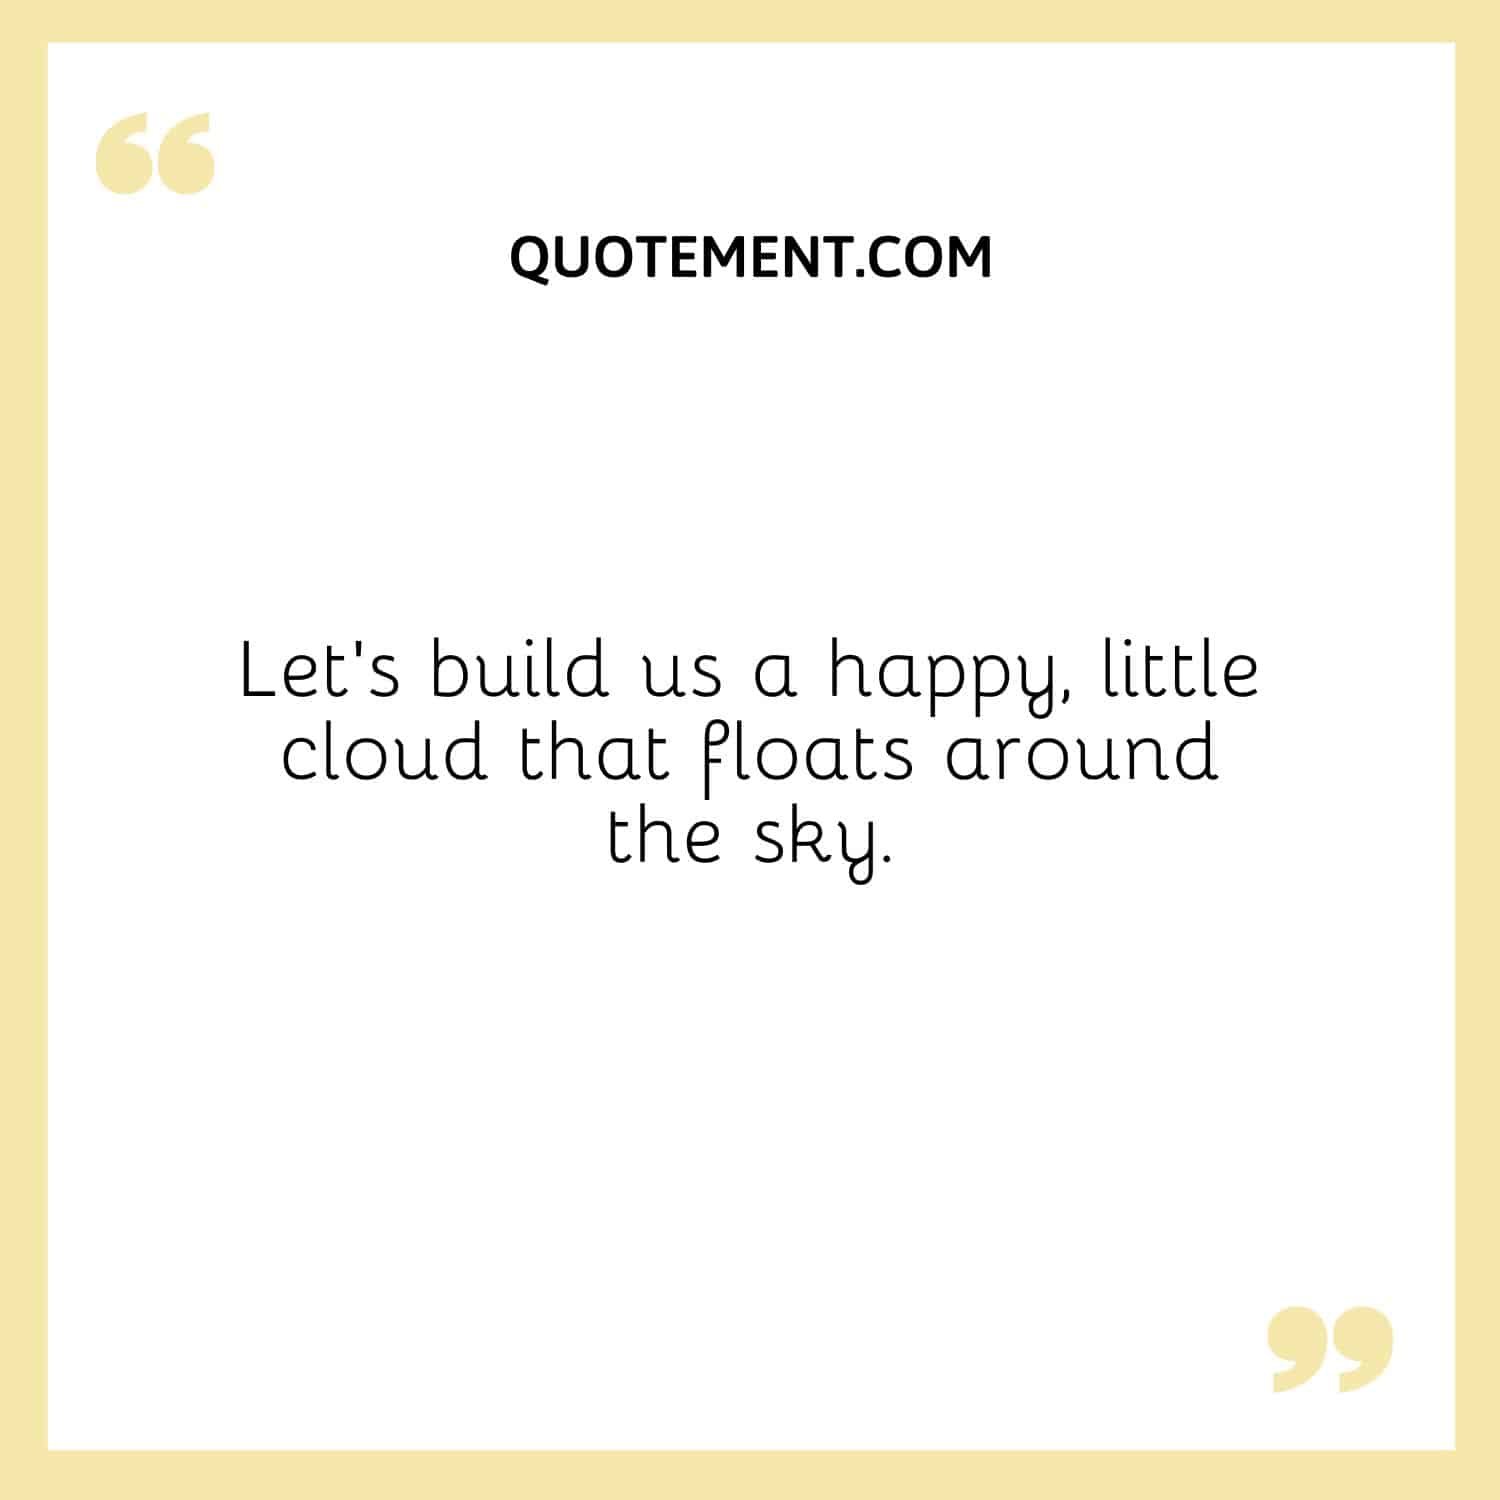 Let’s build us a happy, little cloud that floats around the sky.